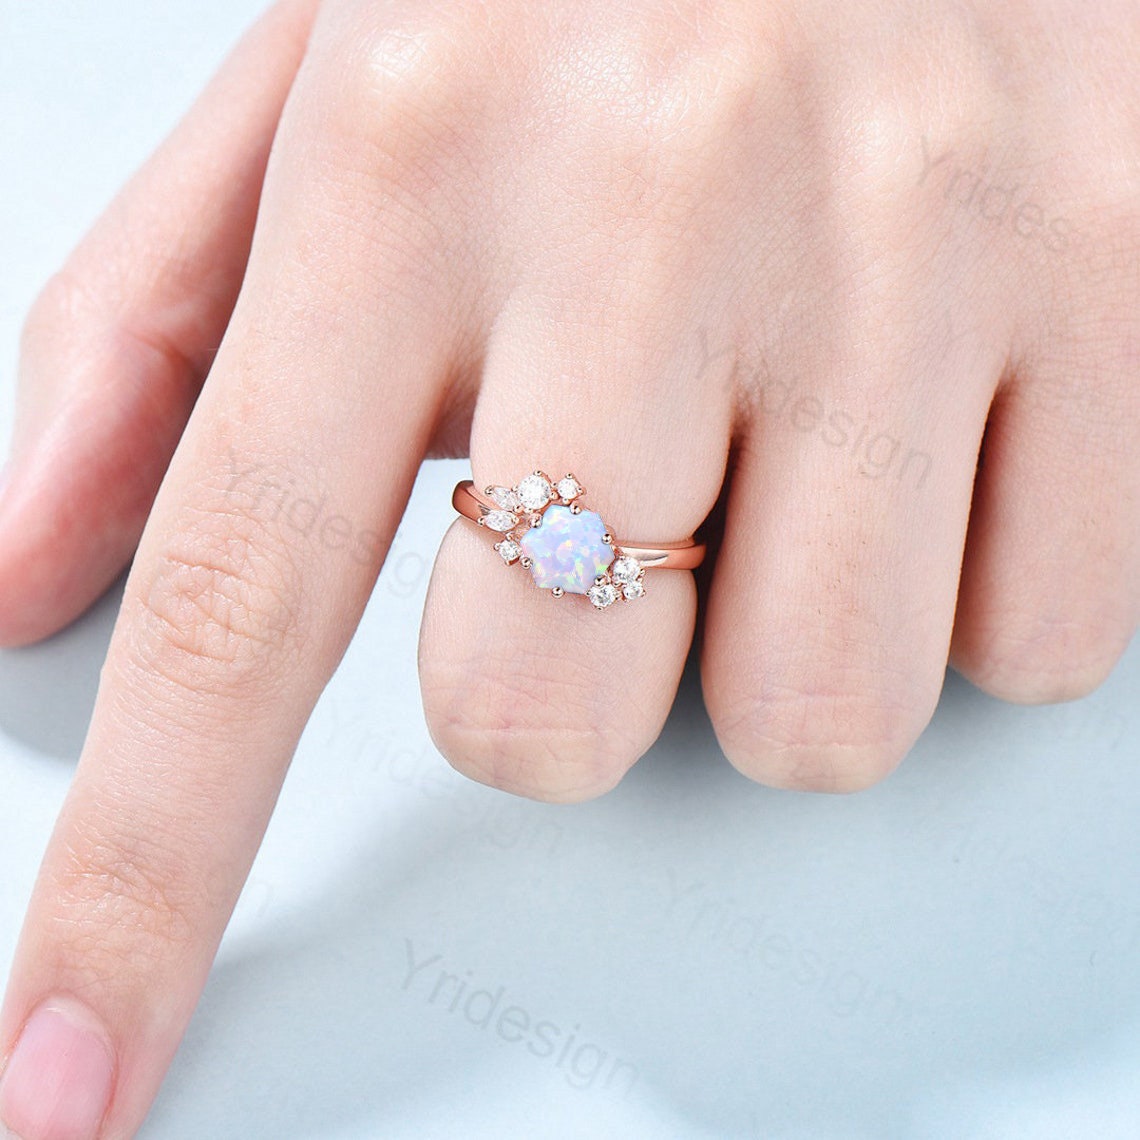 Hexagon cut opal ring silver vintage unique white opal engagement ring cluster simulant diamond ring art deco promise ring for women - PENFINE